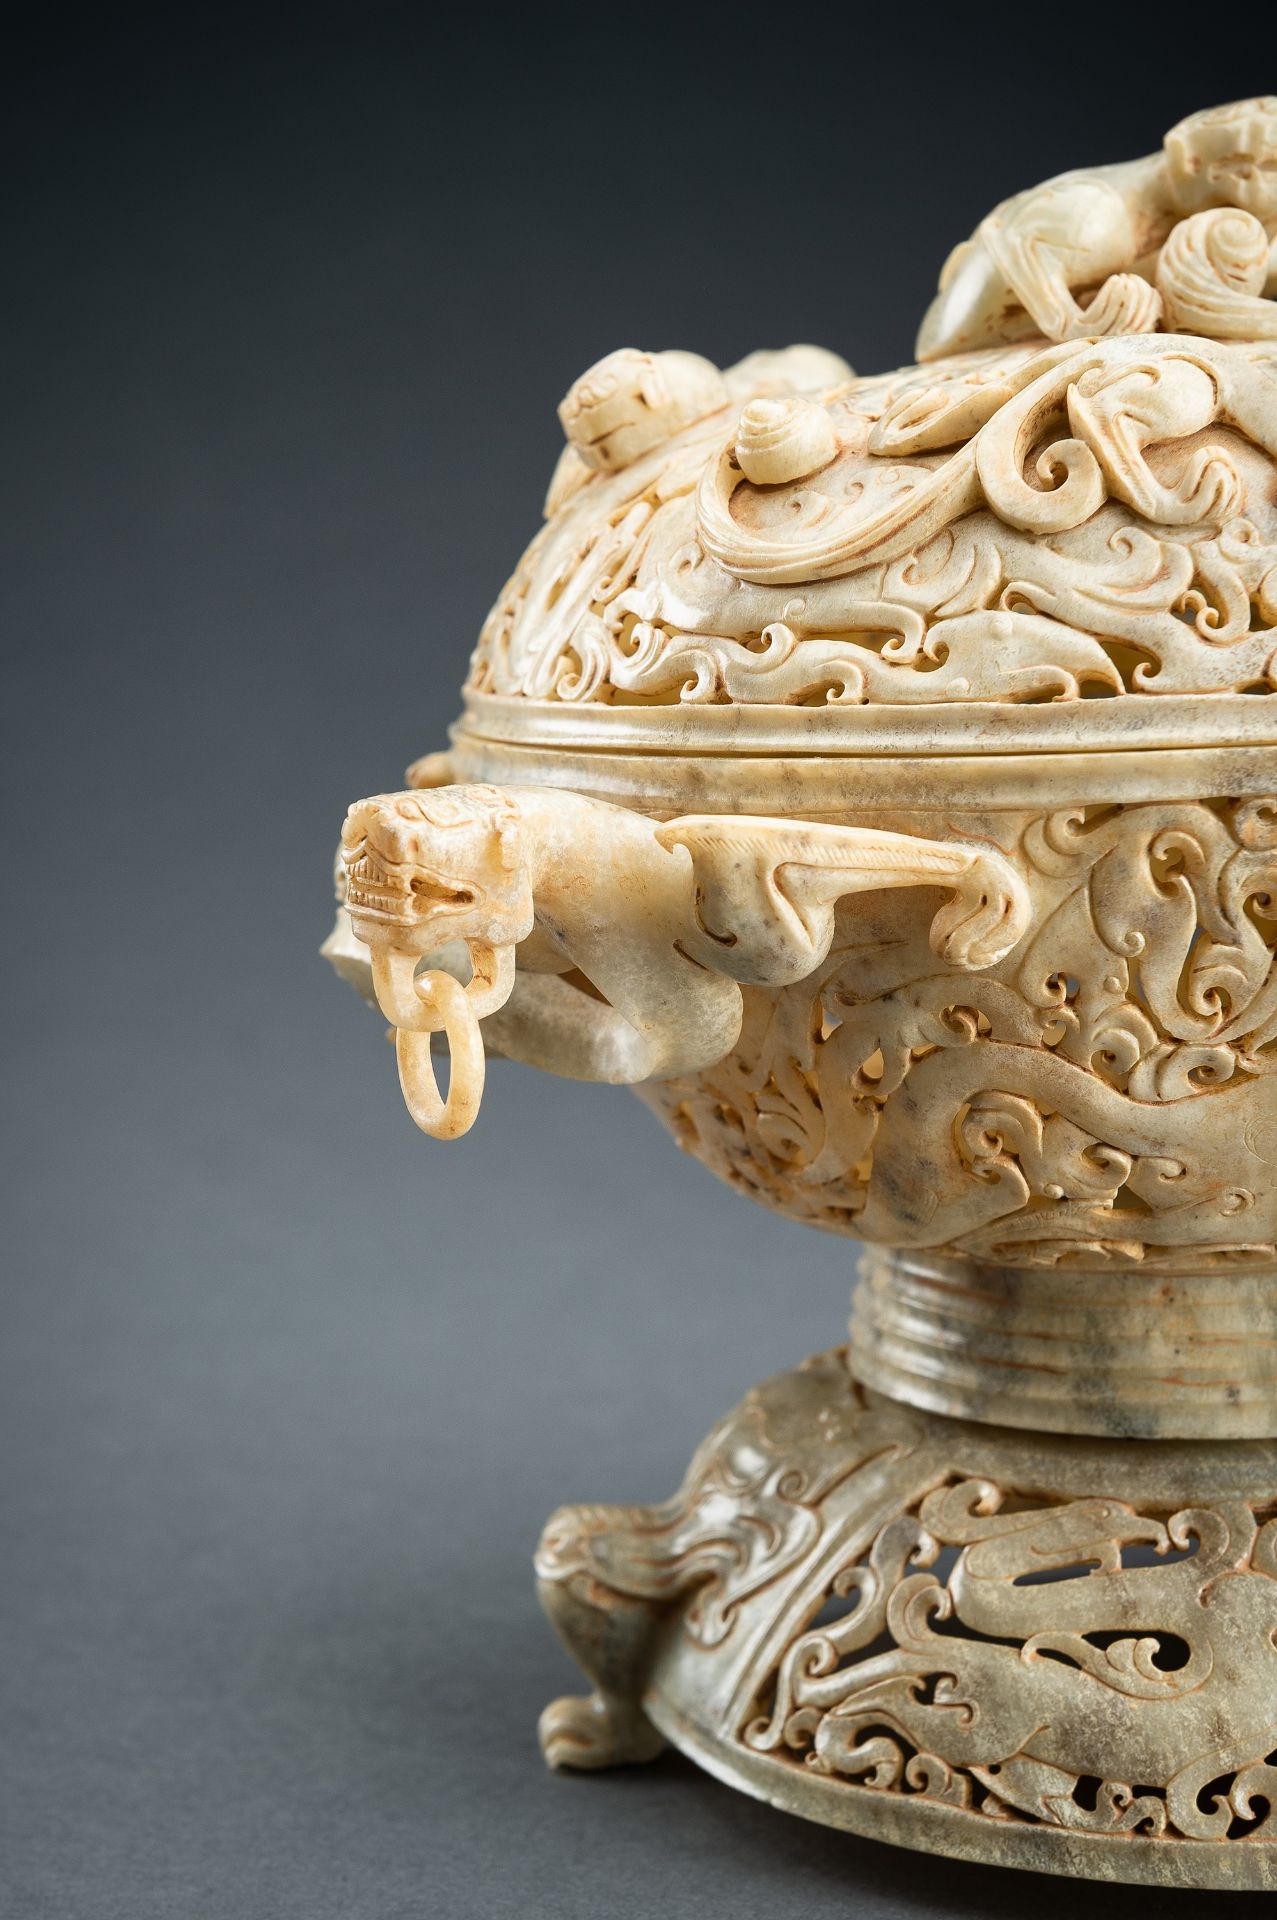 A LARGE AND IMPRESSIVE 3-PART RETICULATED CELADON JADE VESSEL - Image 7 of 19